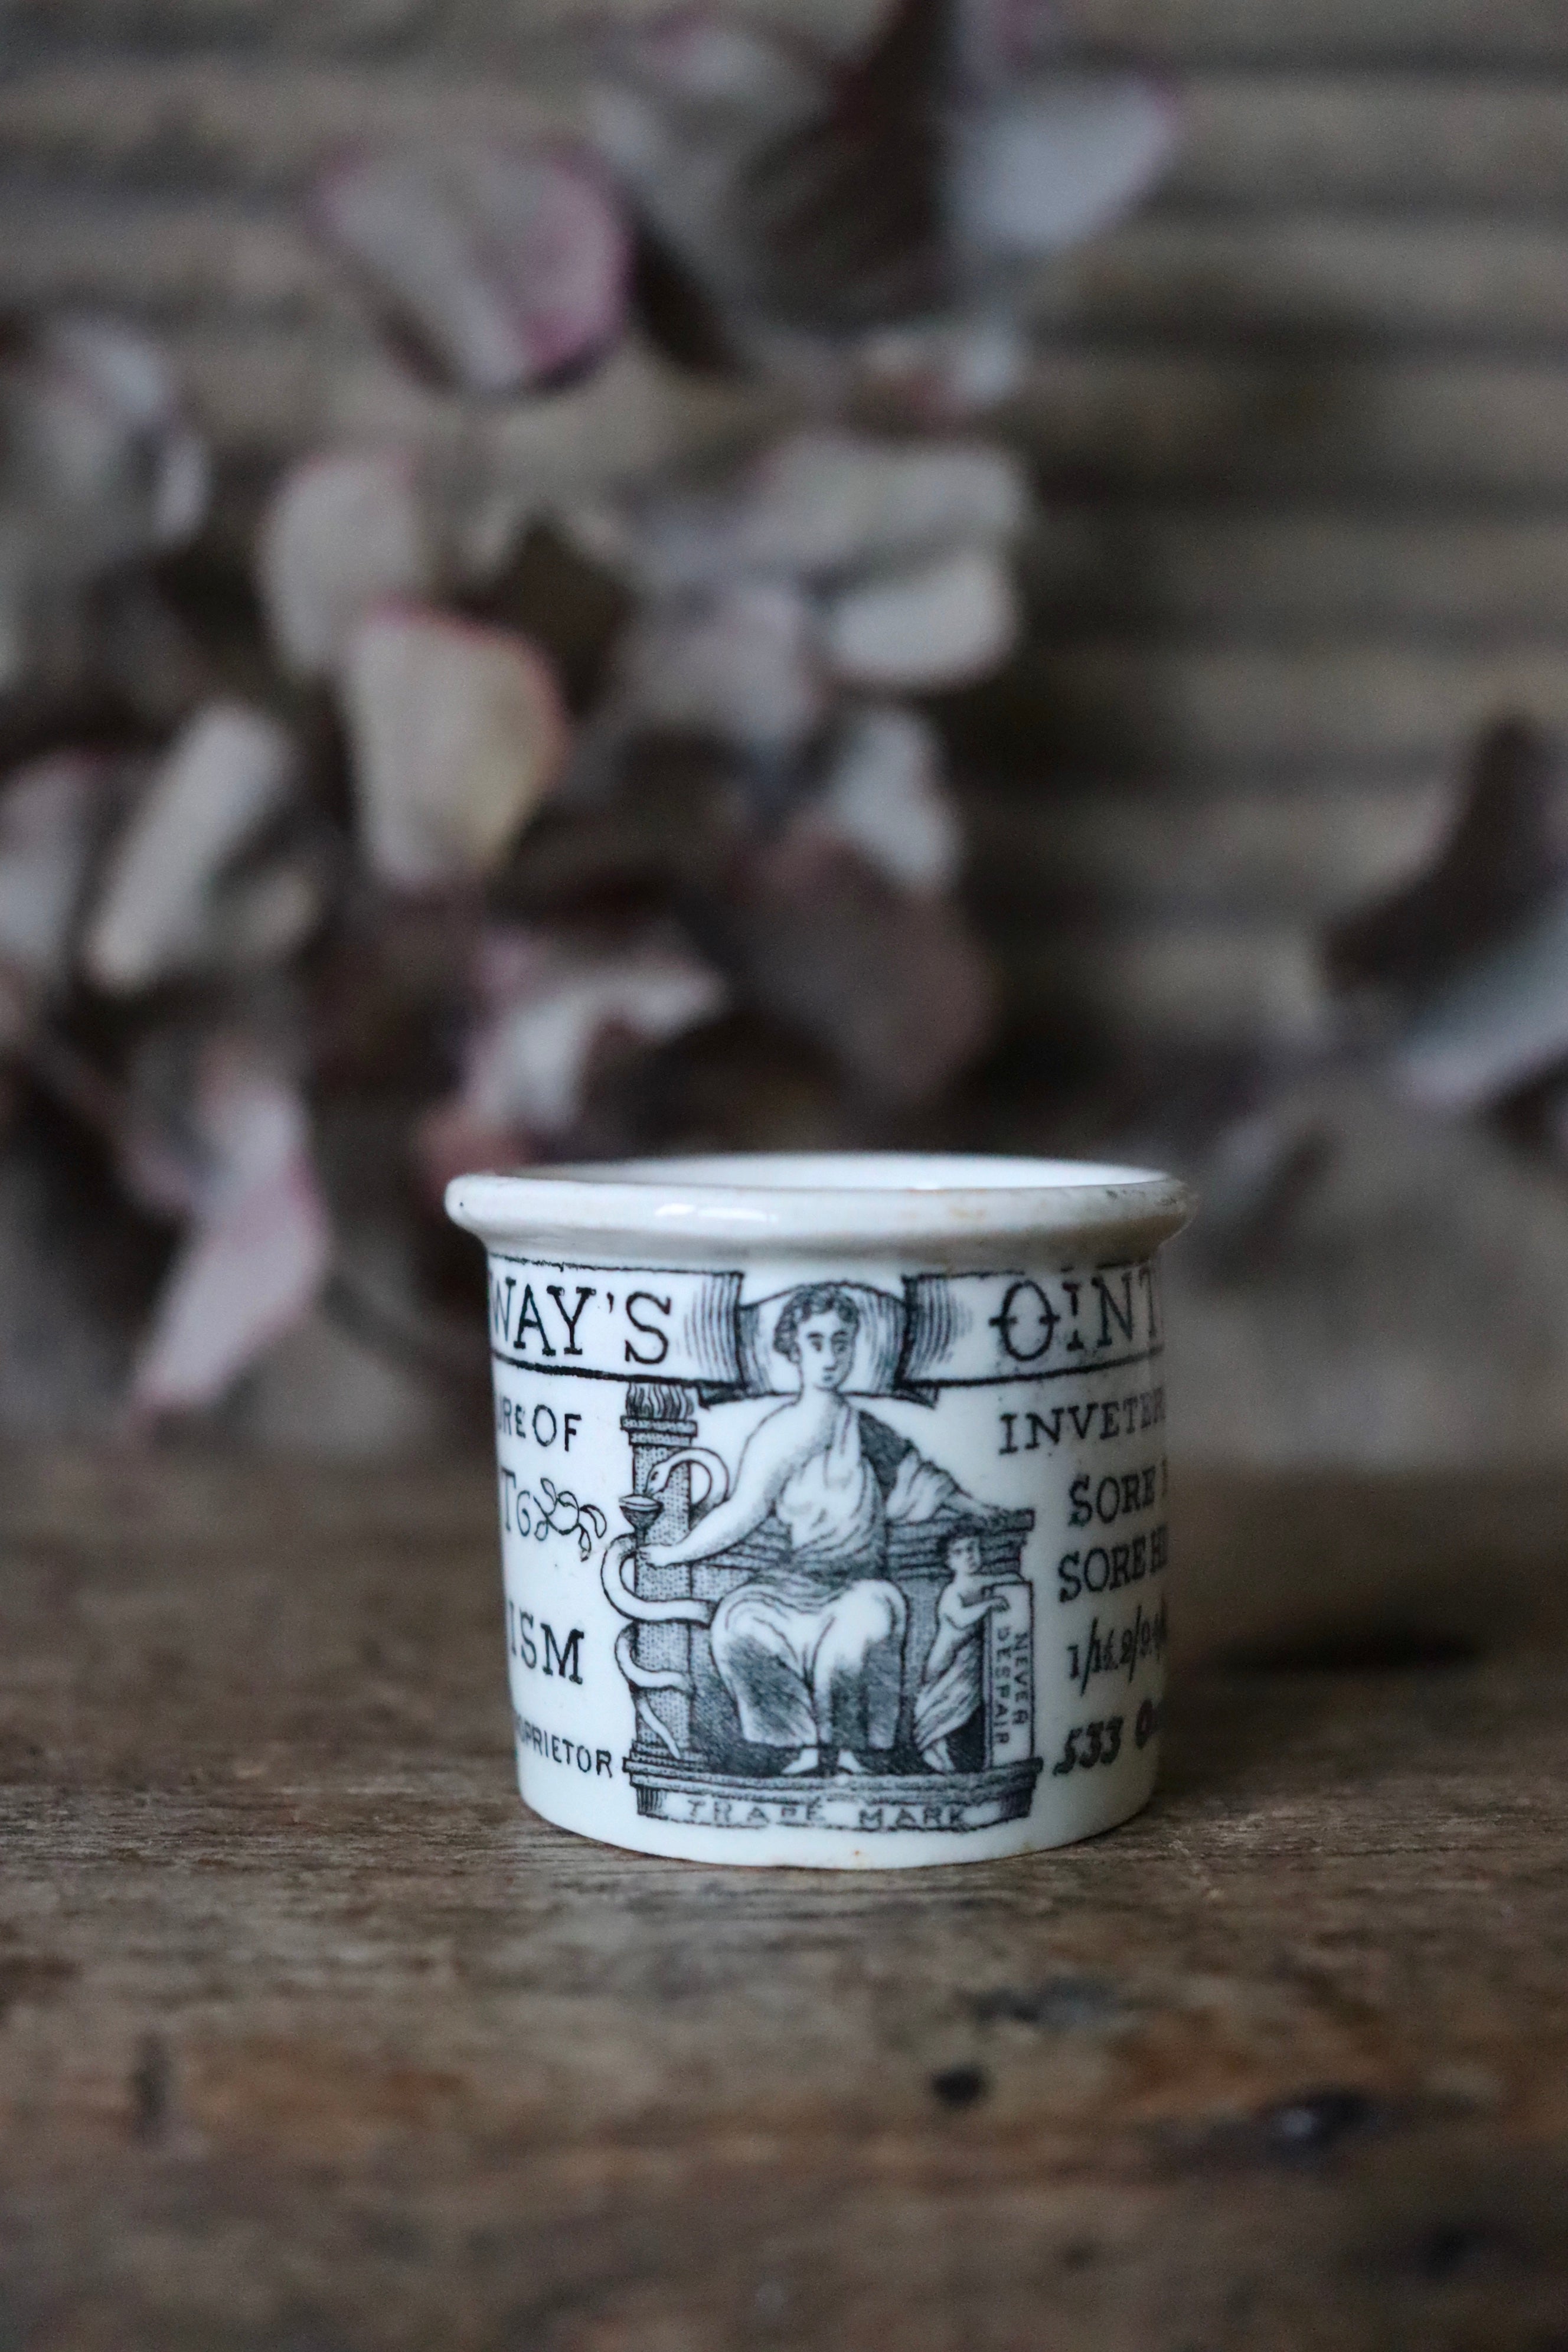 Antique Holloway's Ointment Chemist Pot - Reserved